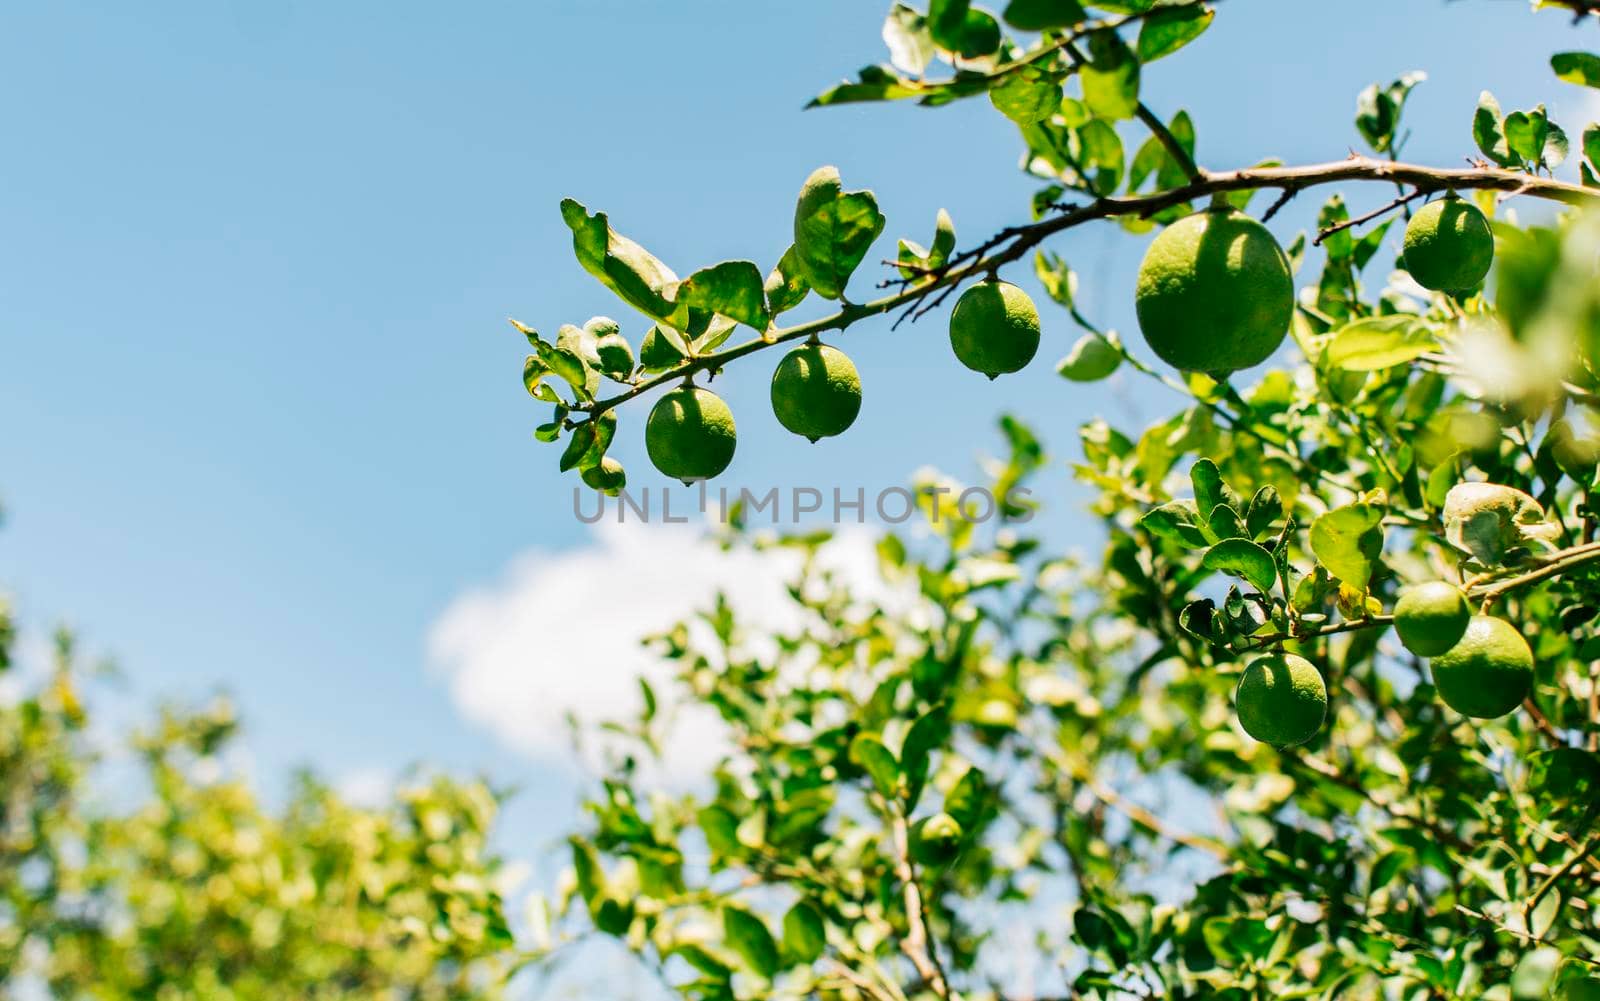 Green lemons on a branch with sky background. Beautiful unripe lemons in a garden with blue sky background, Harvest of green lemons hanging on branches by isaiphoto